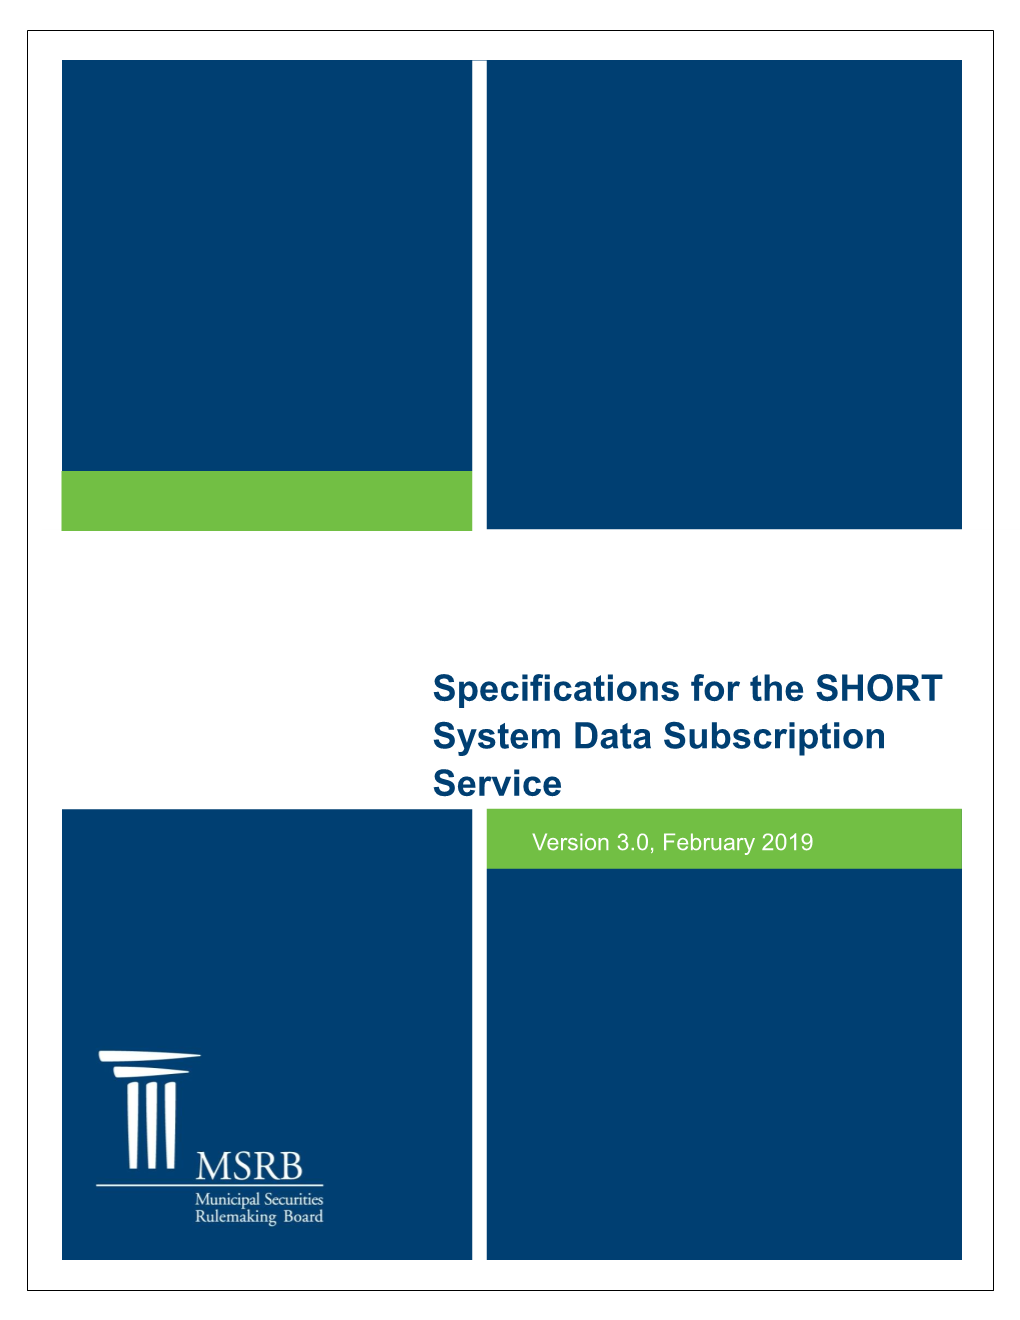 Specifications for the SHORT System Data Subscription Service